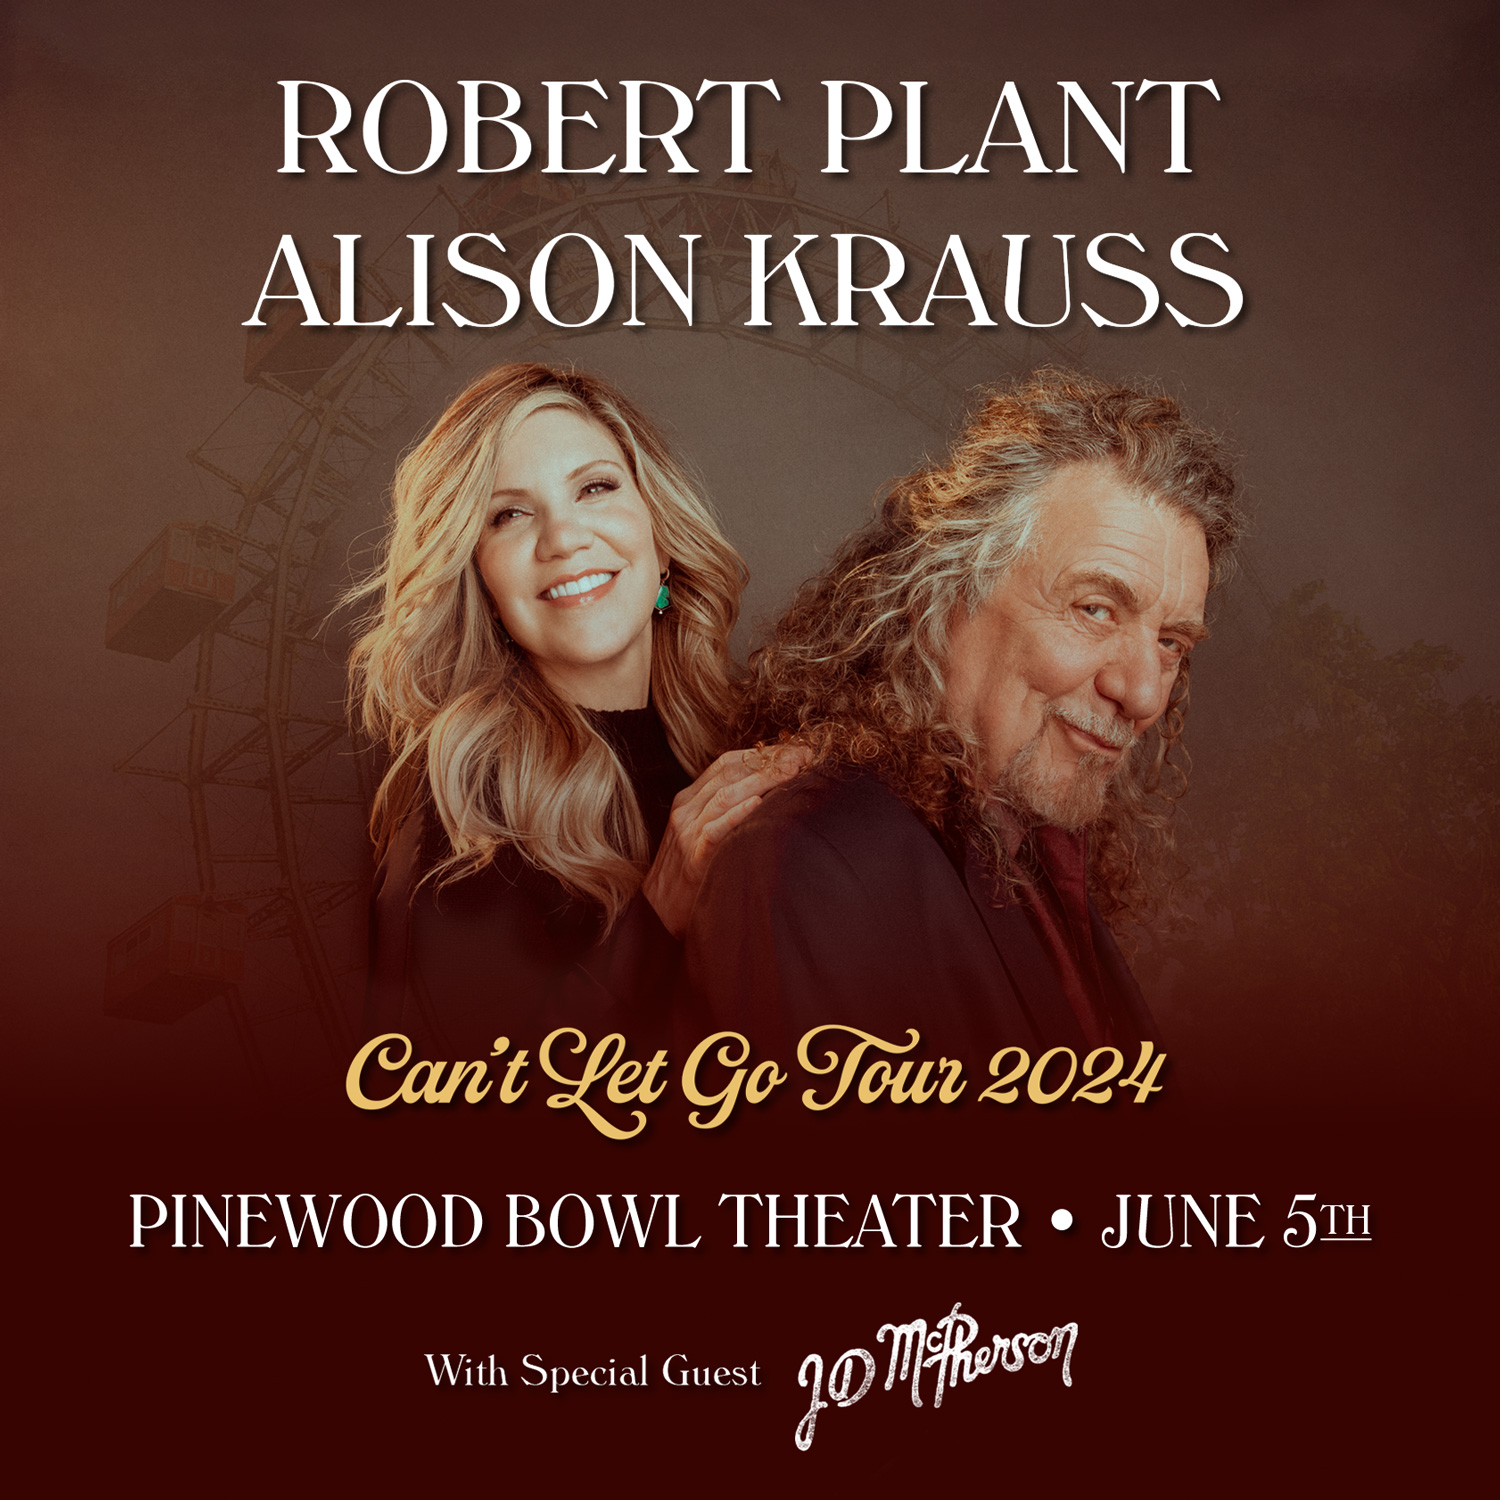 <h1 class="tribe-events-single-event-title">Robert Plant & Alison Kraus</h1>